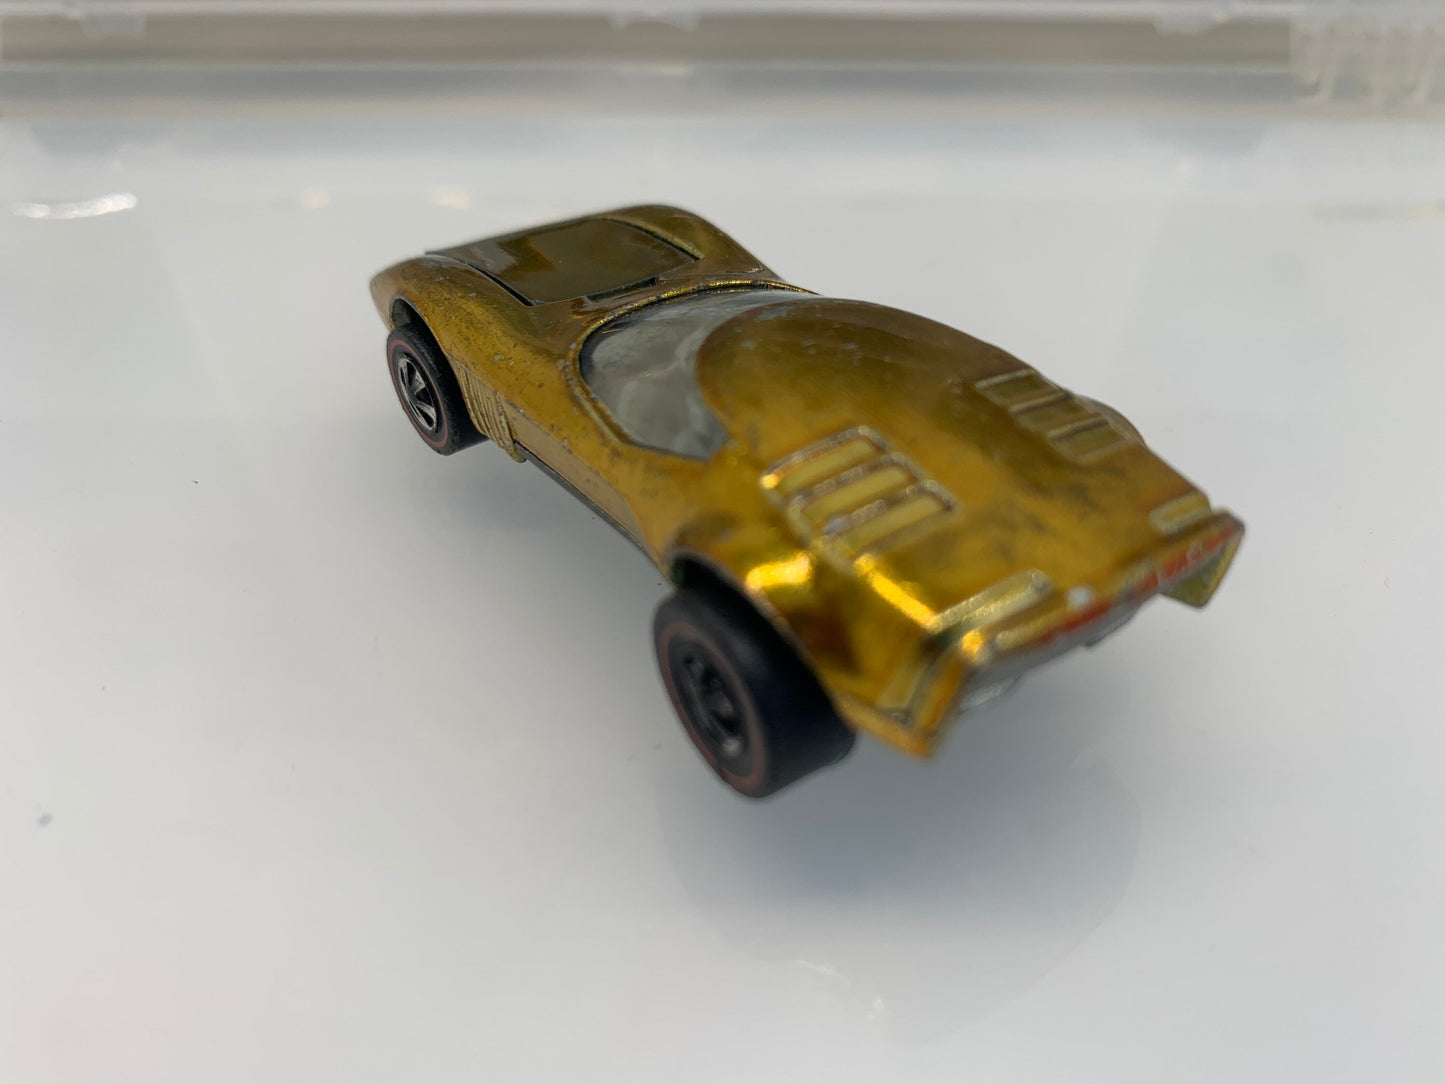 Redline Hot Wheels Torero Spectraflame Gold Perfect Birthday Gift Miniature Collectable Scale Model Toy Car